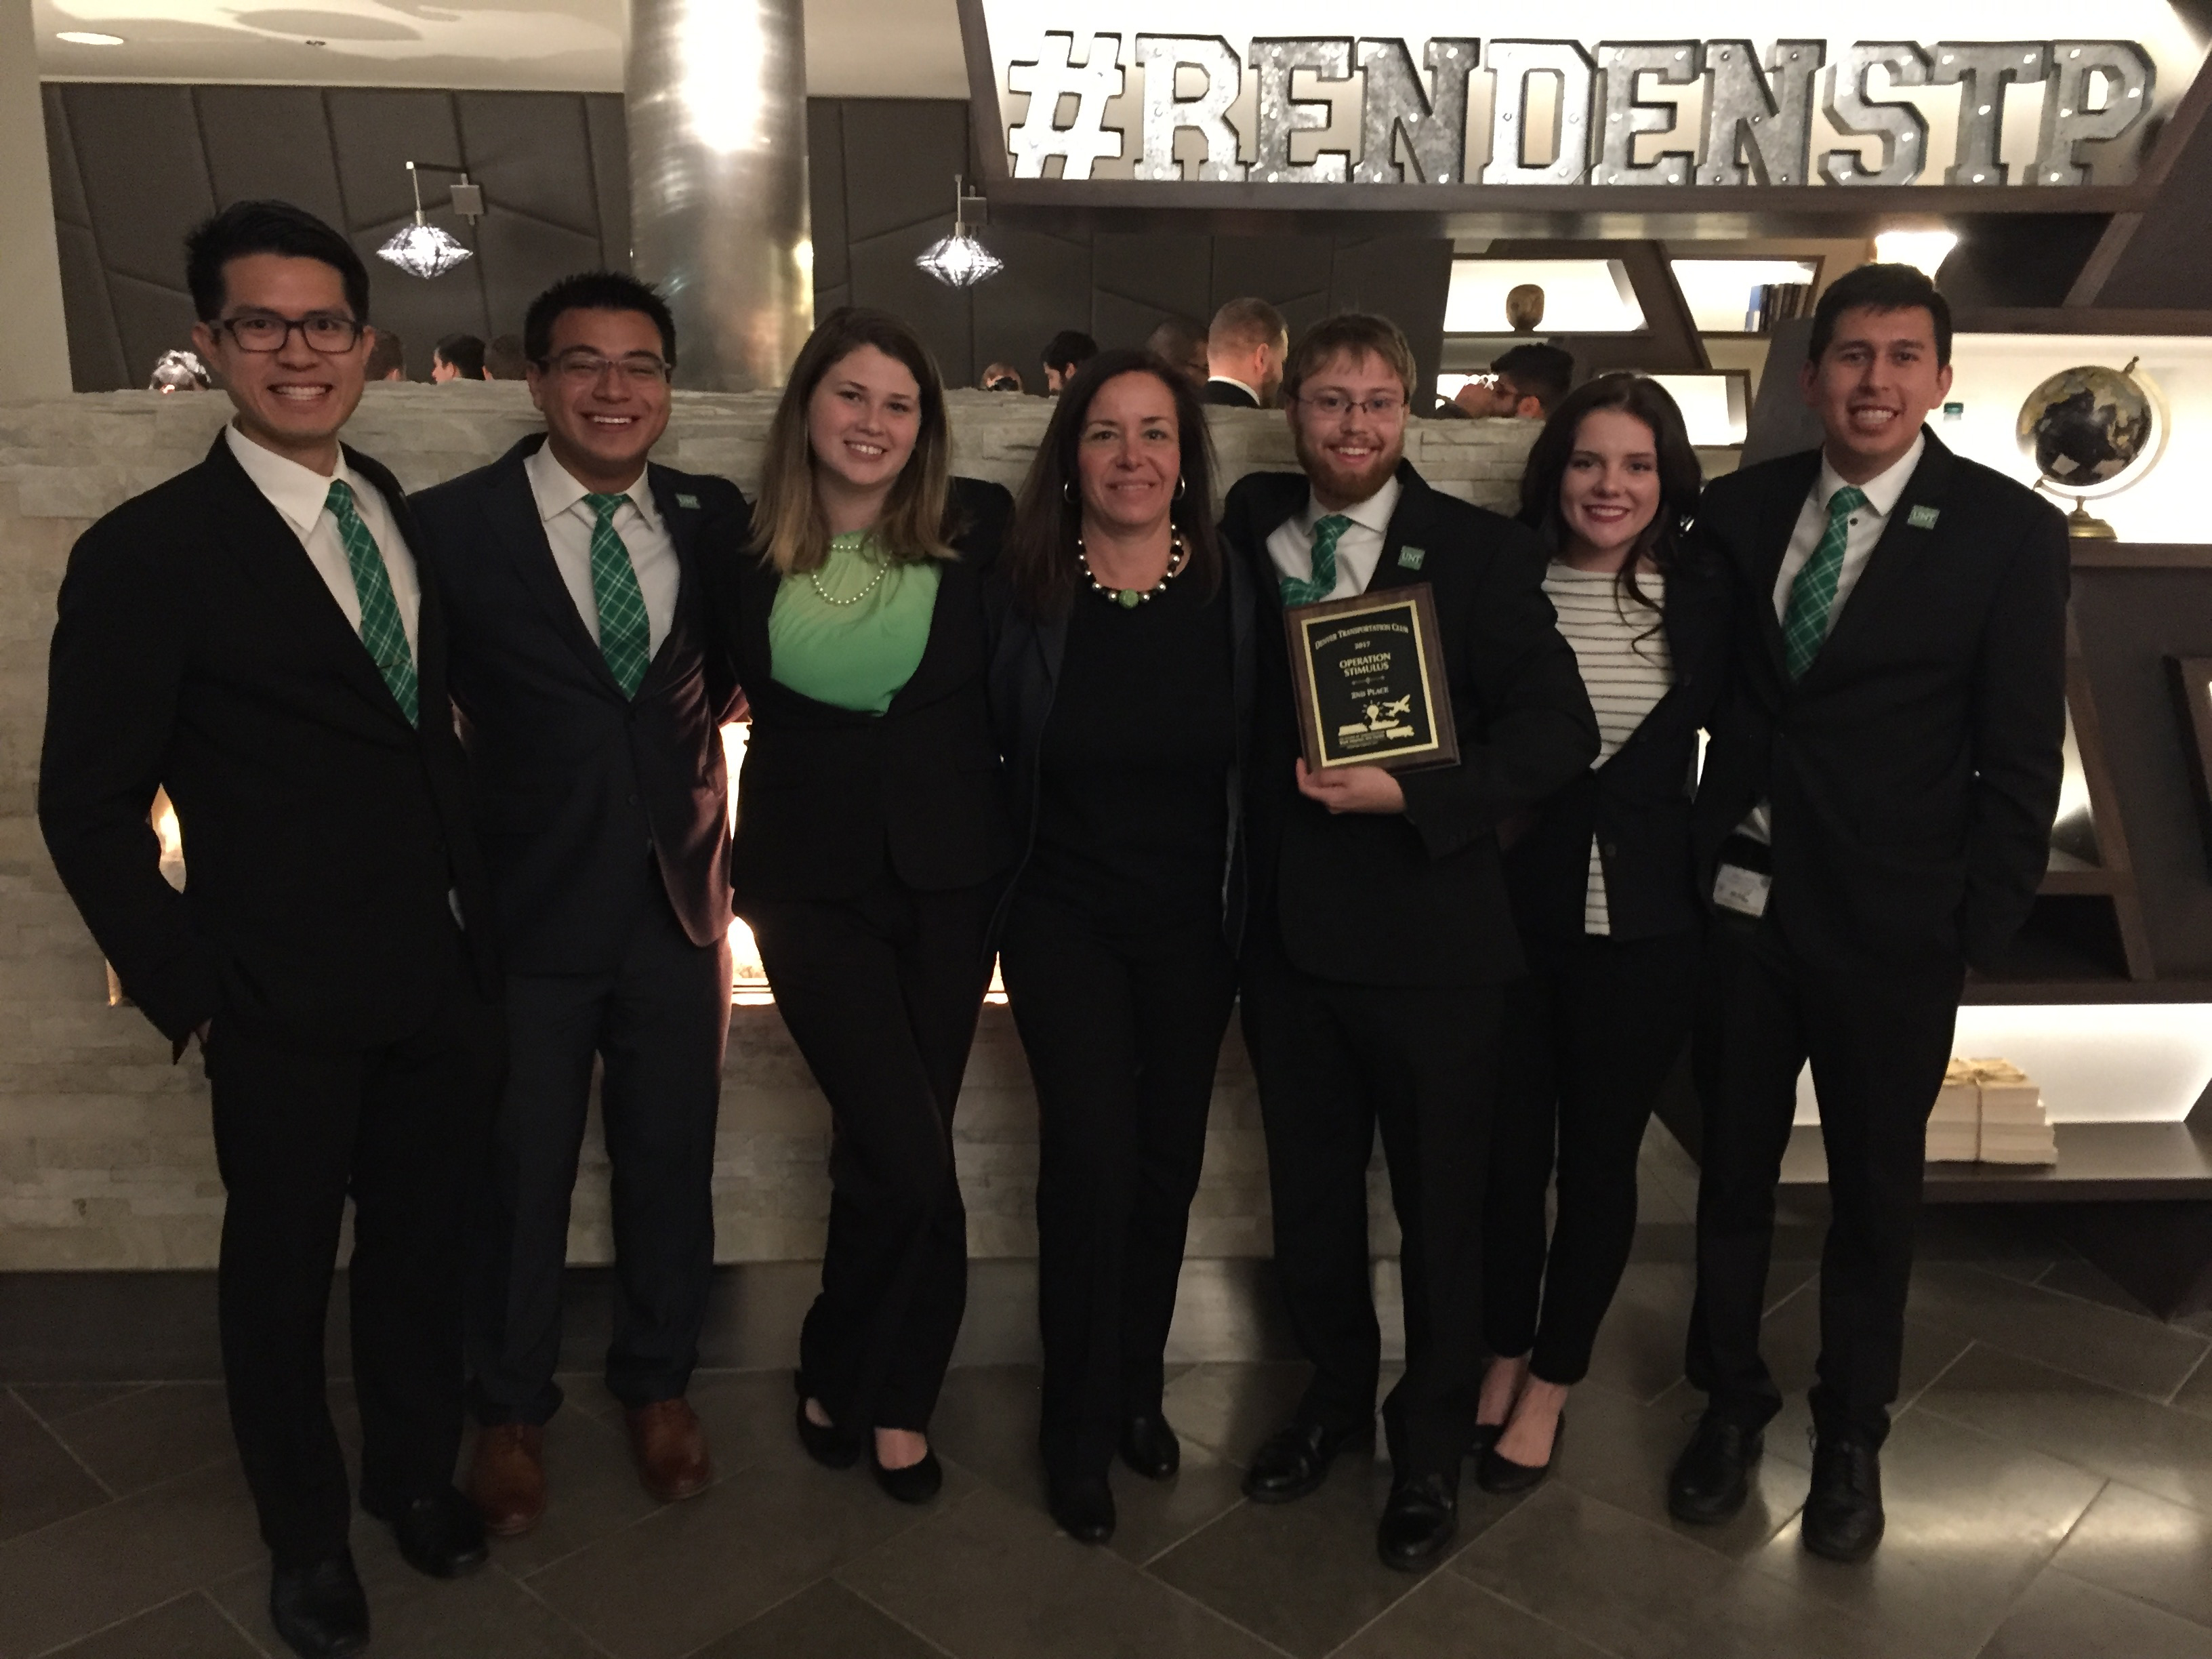 The University of North Texas won second place in one of the U.S. and Canada’s most competitive logistics case contests, Operation Stimulus. Pictured left to right: Hong Yun Yong, Luis Salazar (observer), Ashleigh Allison, Julie-Willems Espinoza (student advisor), David Looney, Miranda Robertson (observer) and Sergio Garcia.